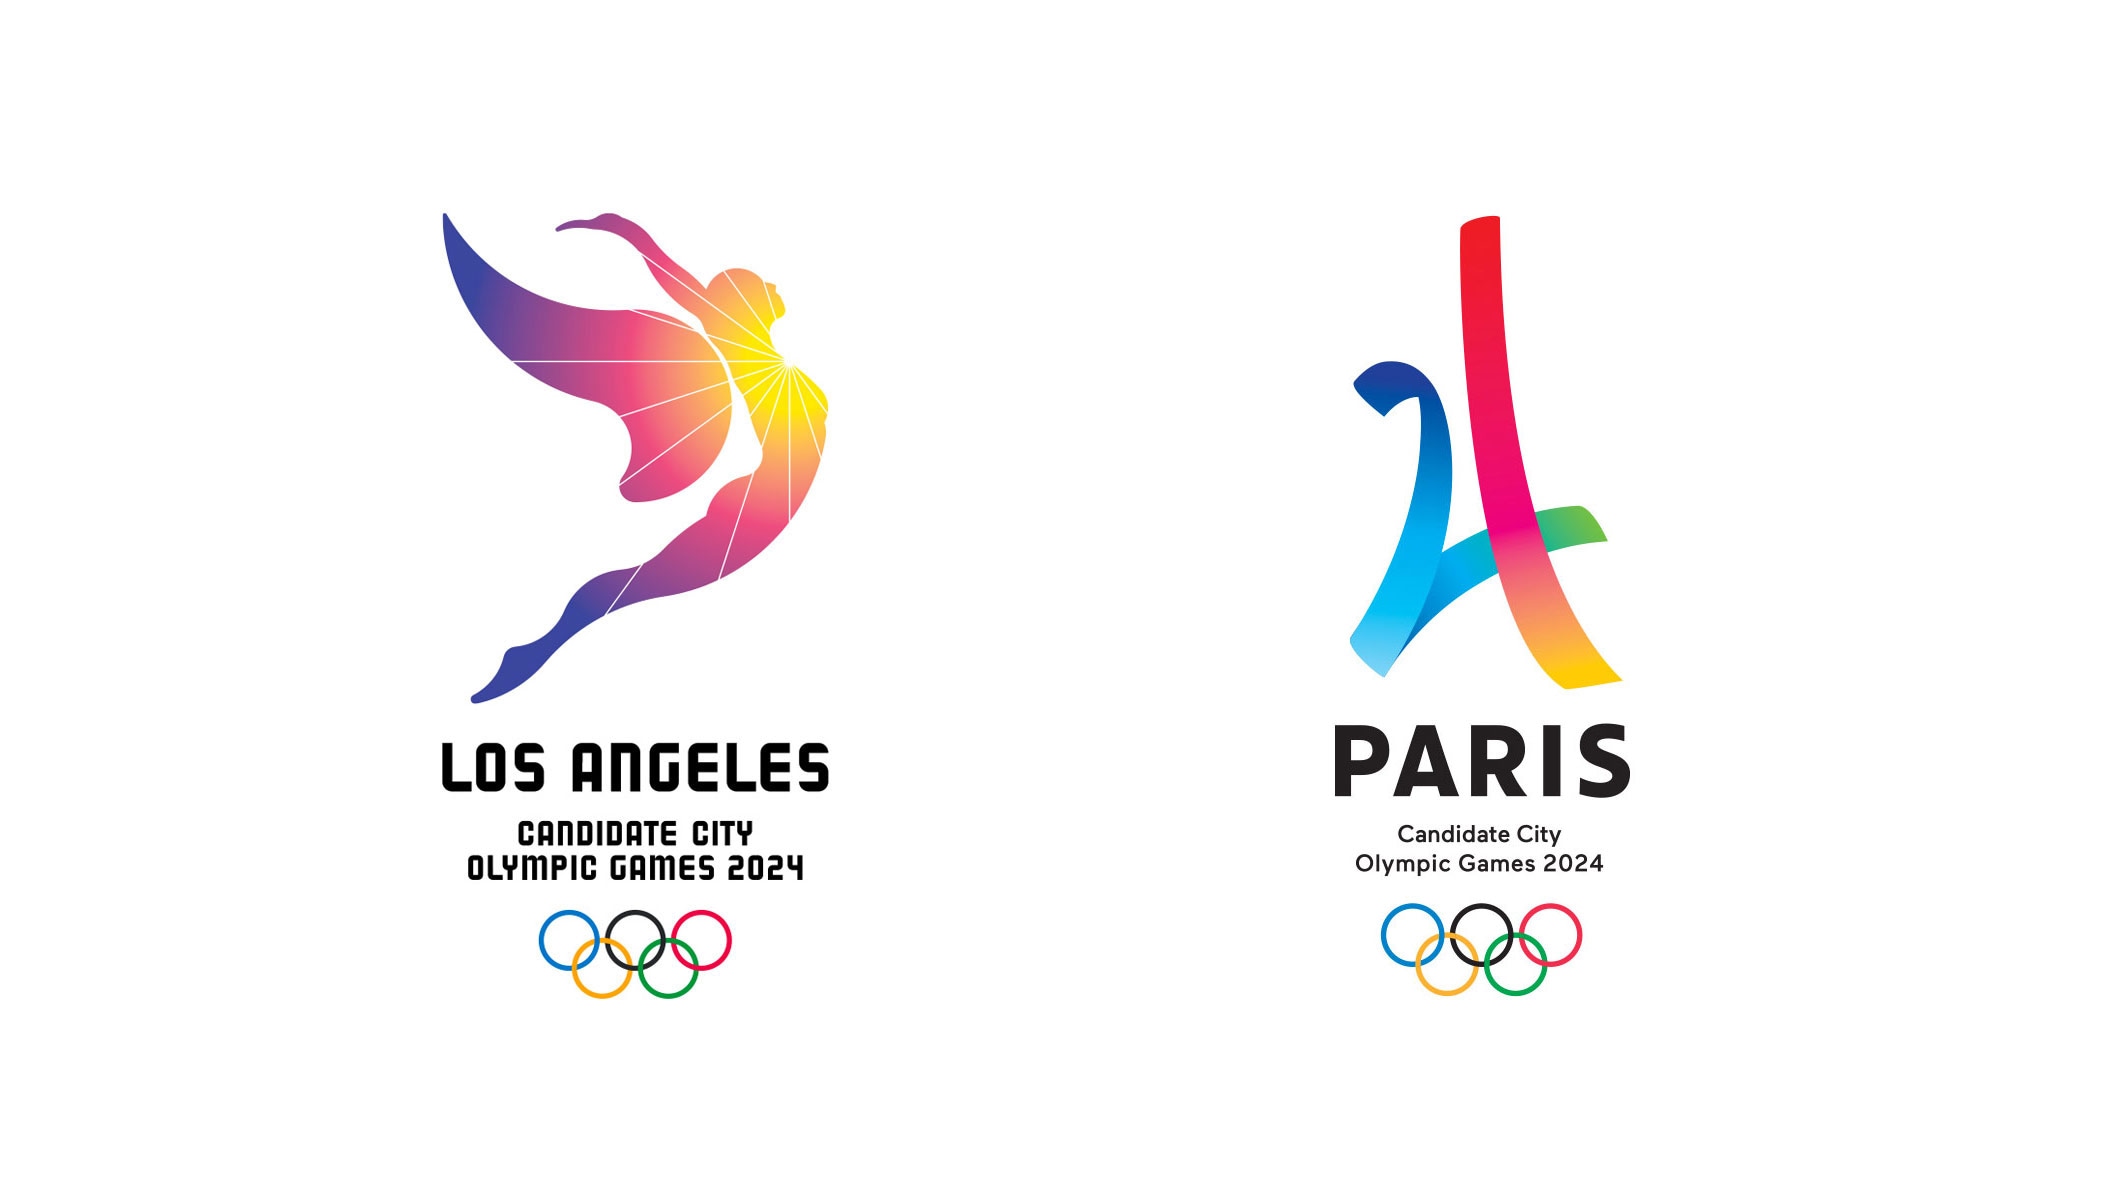 Awarding the Olympic Games 2024 and 2028 is a golden opportunity